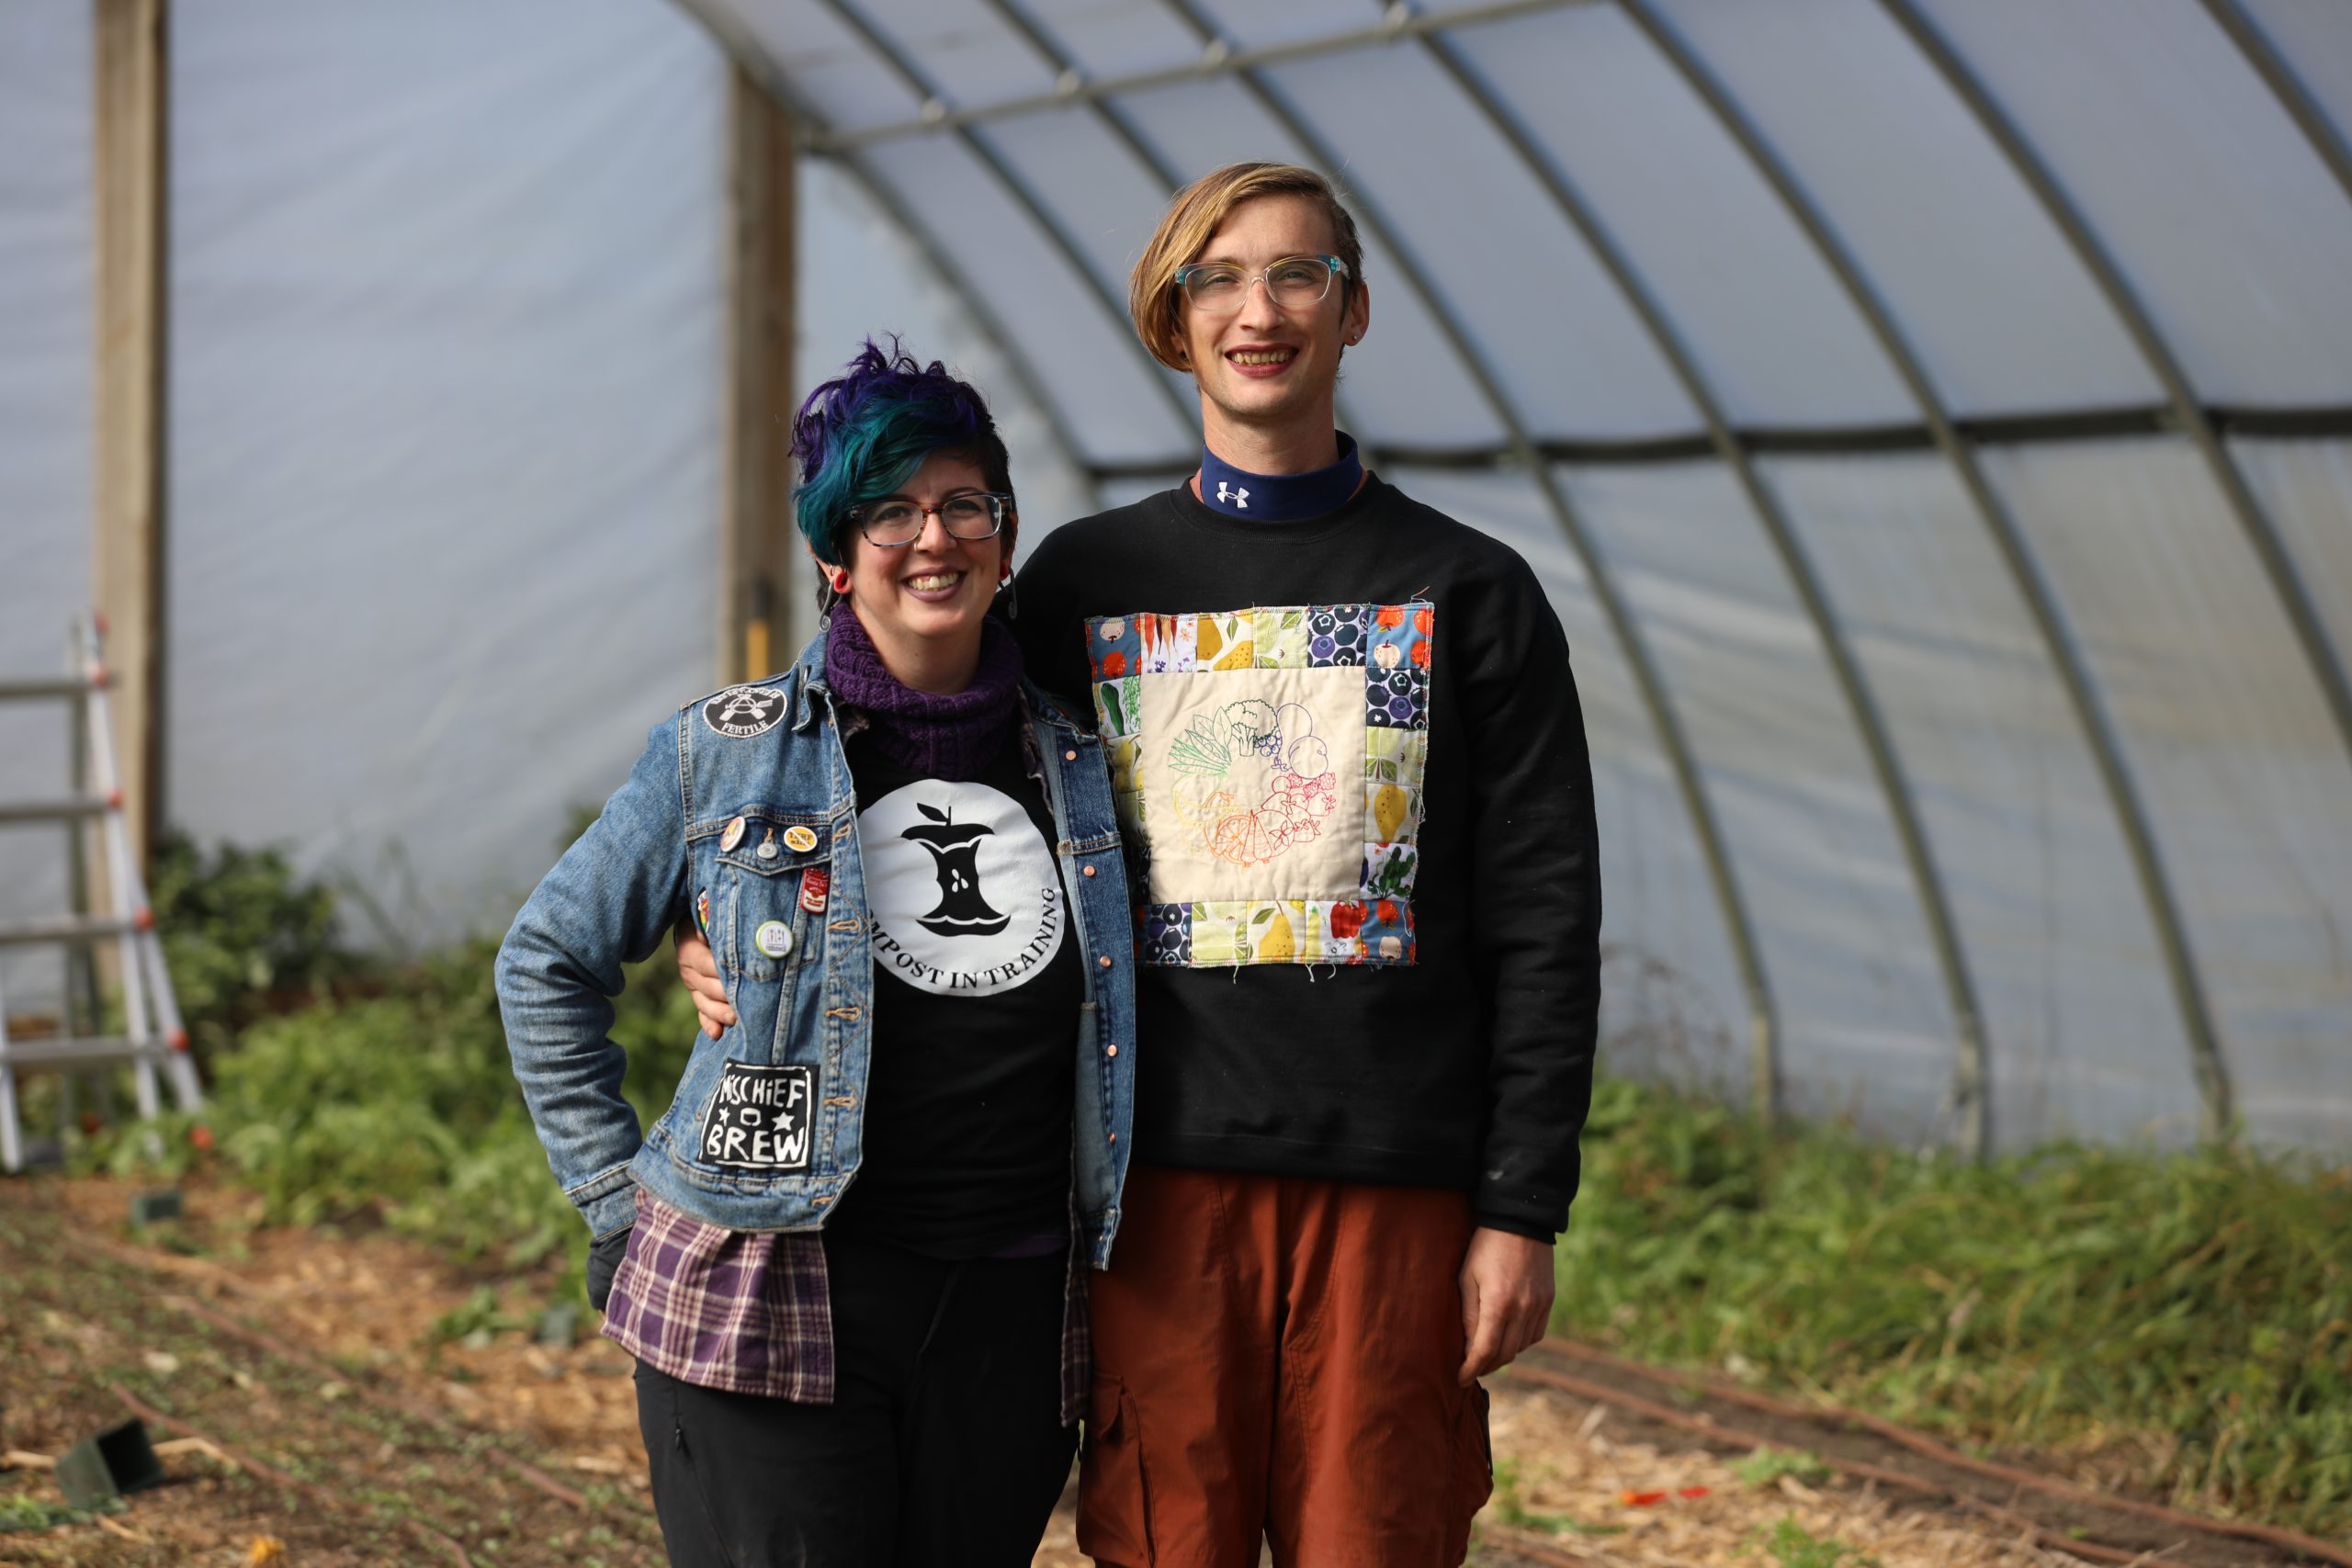 Queering the family farm Despite obstacles, LGBTQ farmers find fertile ground in Midwest photo